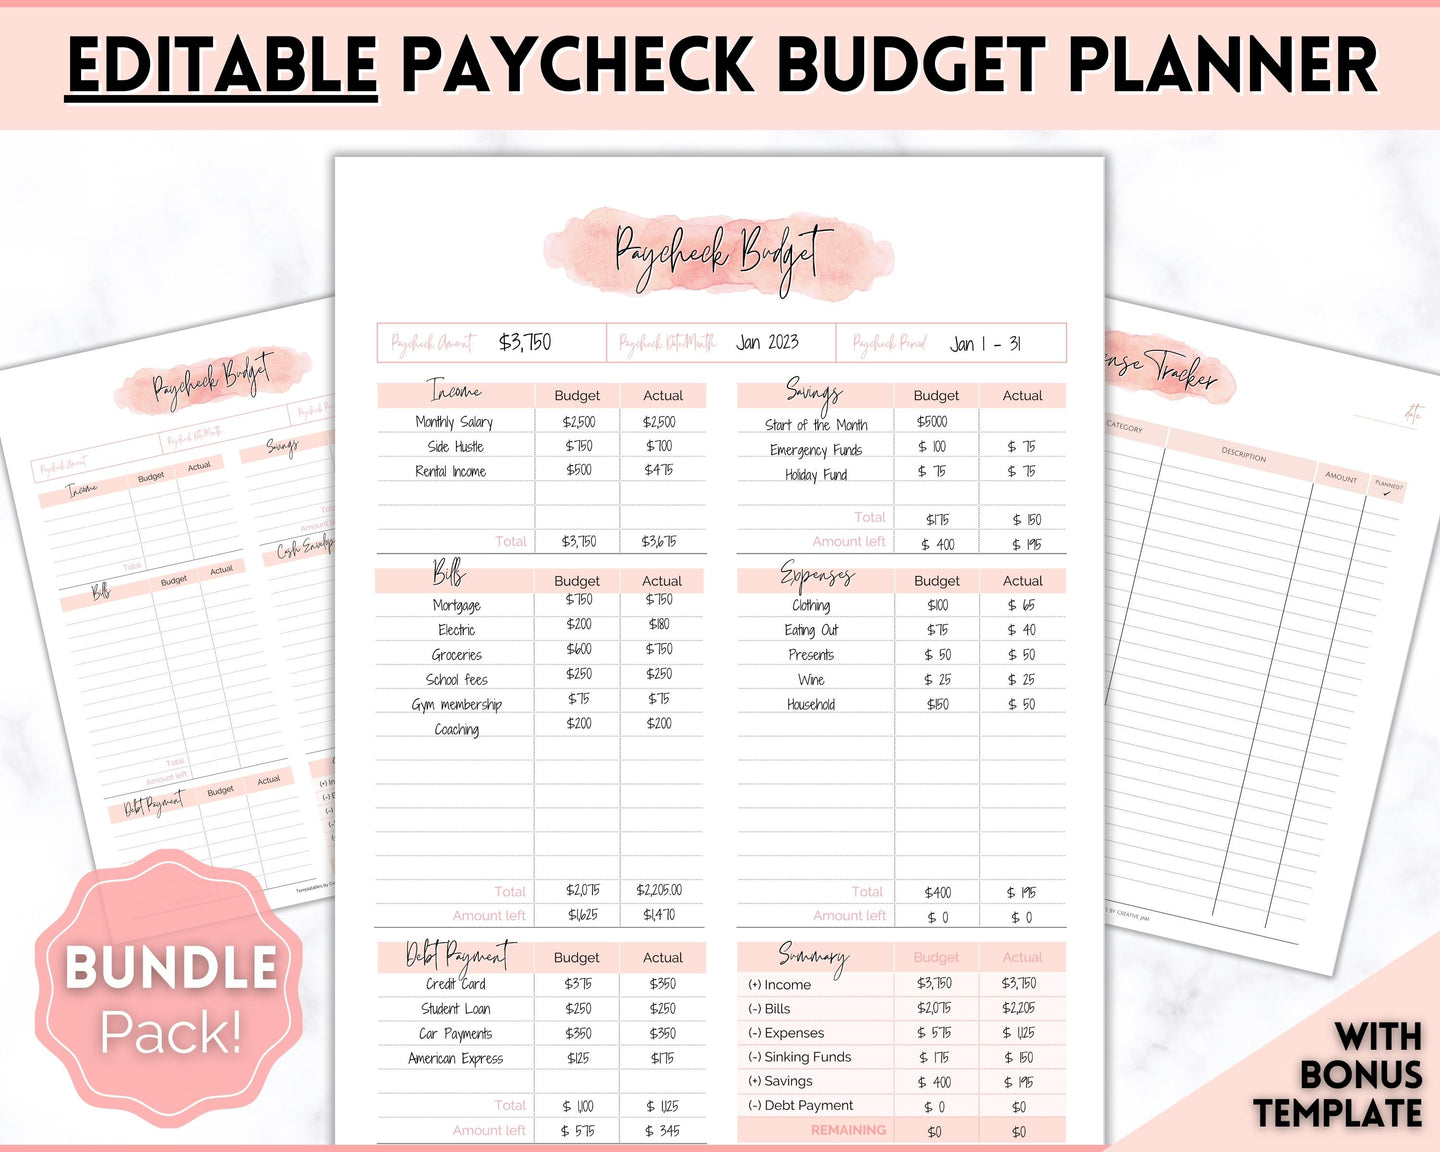 Editable Paycheck Budget Planner Template | Printable Paycheck Tracker, Finance Planner, Zero Based Budget Binder | Pink Watercolor